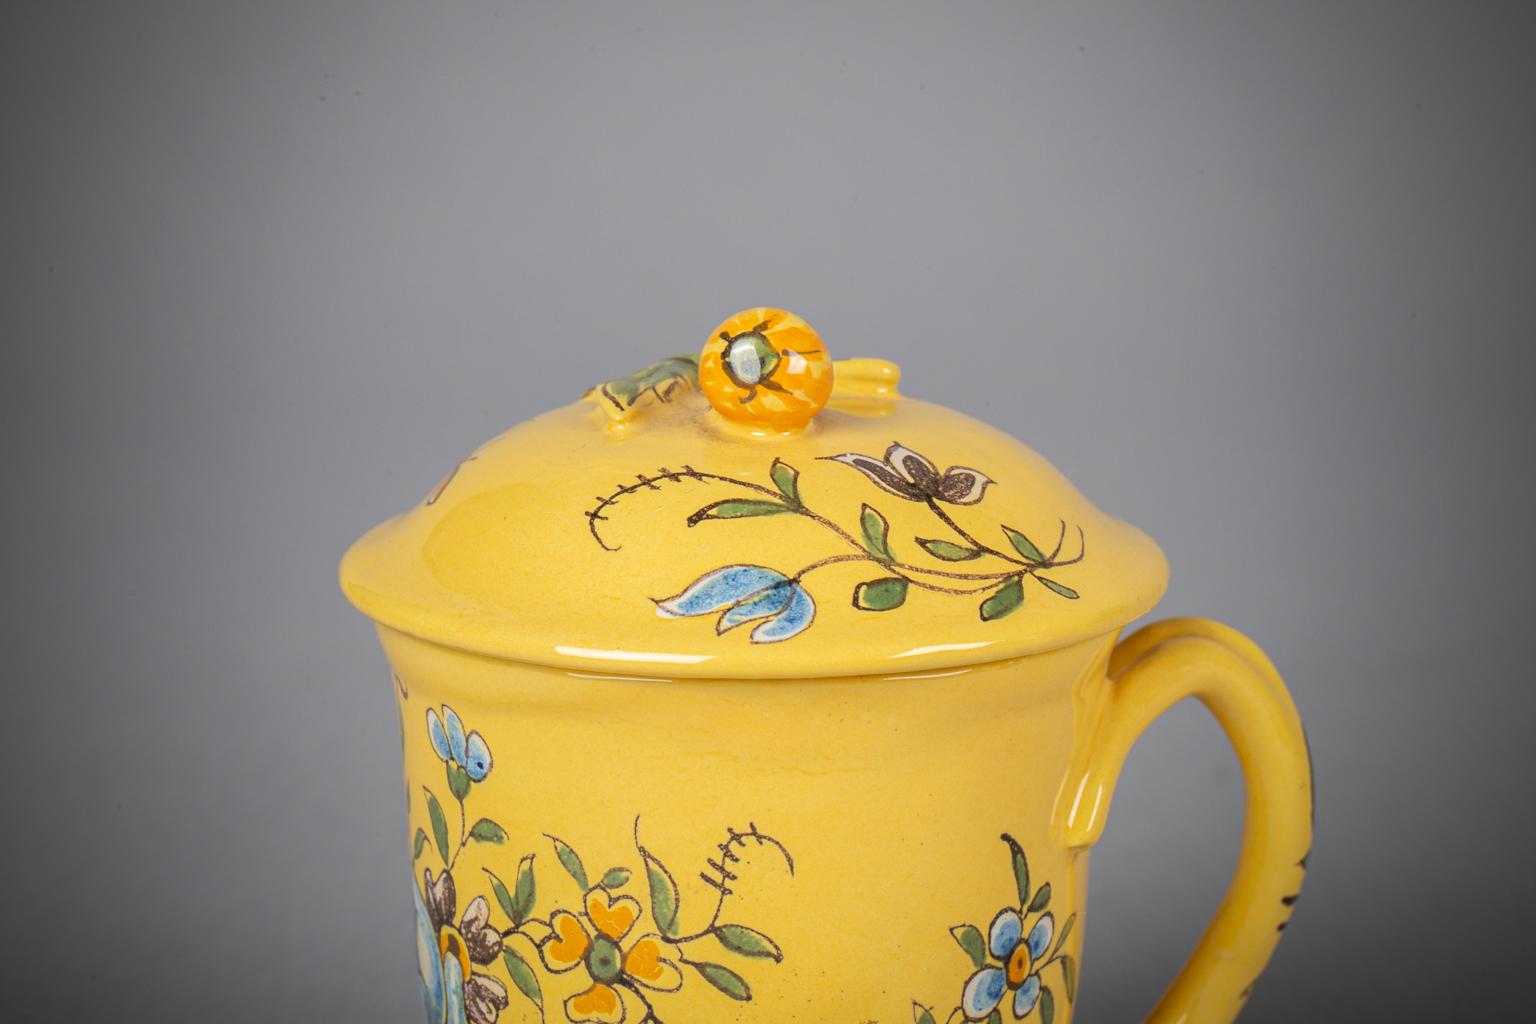 French Faience Yellow Ground Pot-de-creme Set with Platter, circa 1890 For Sale 1